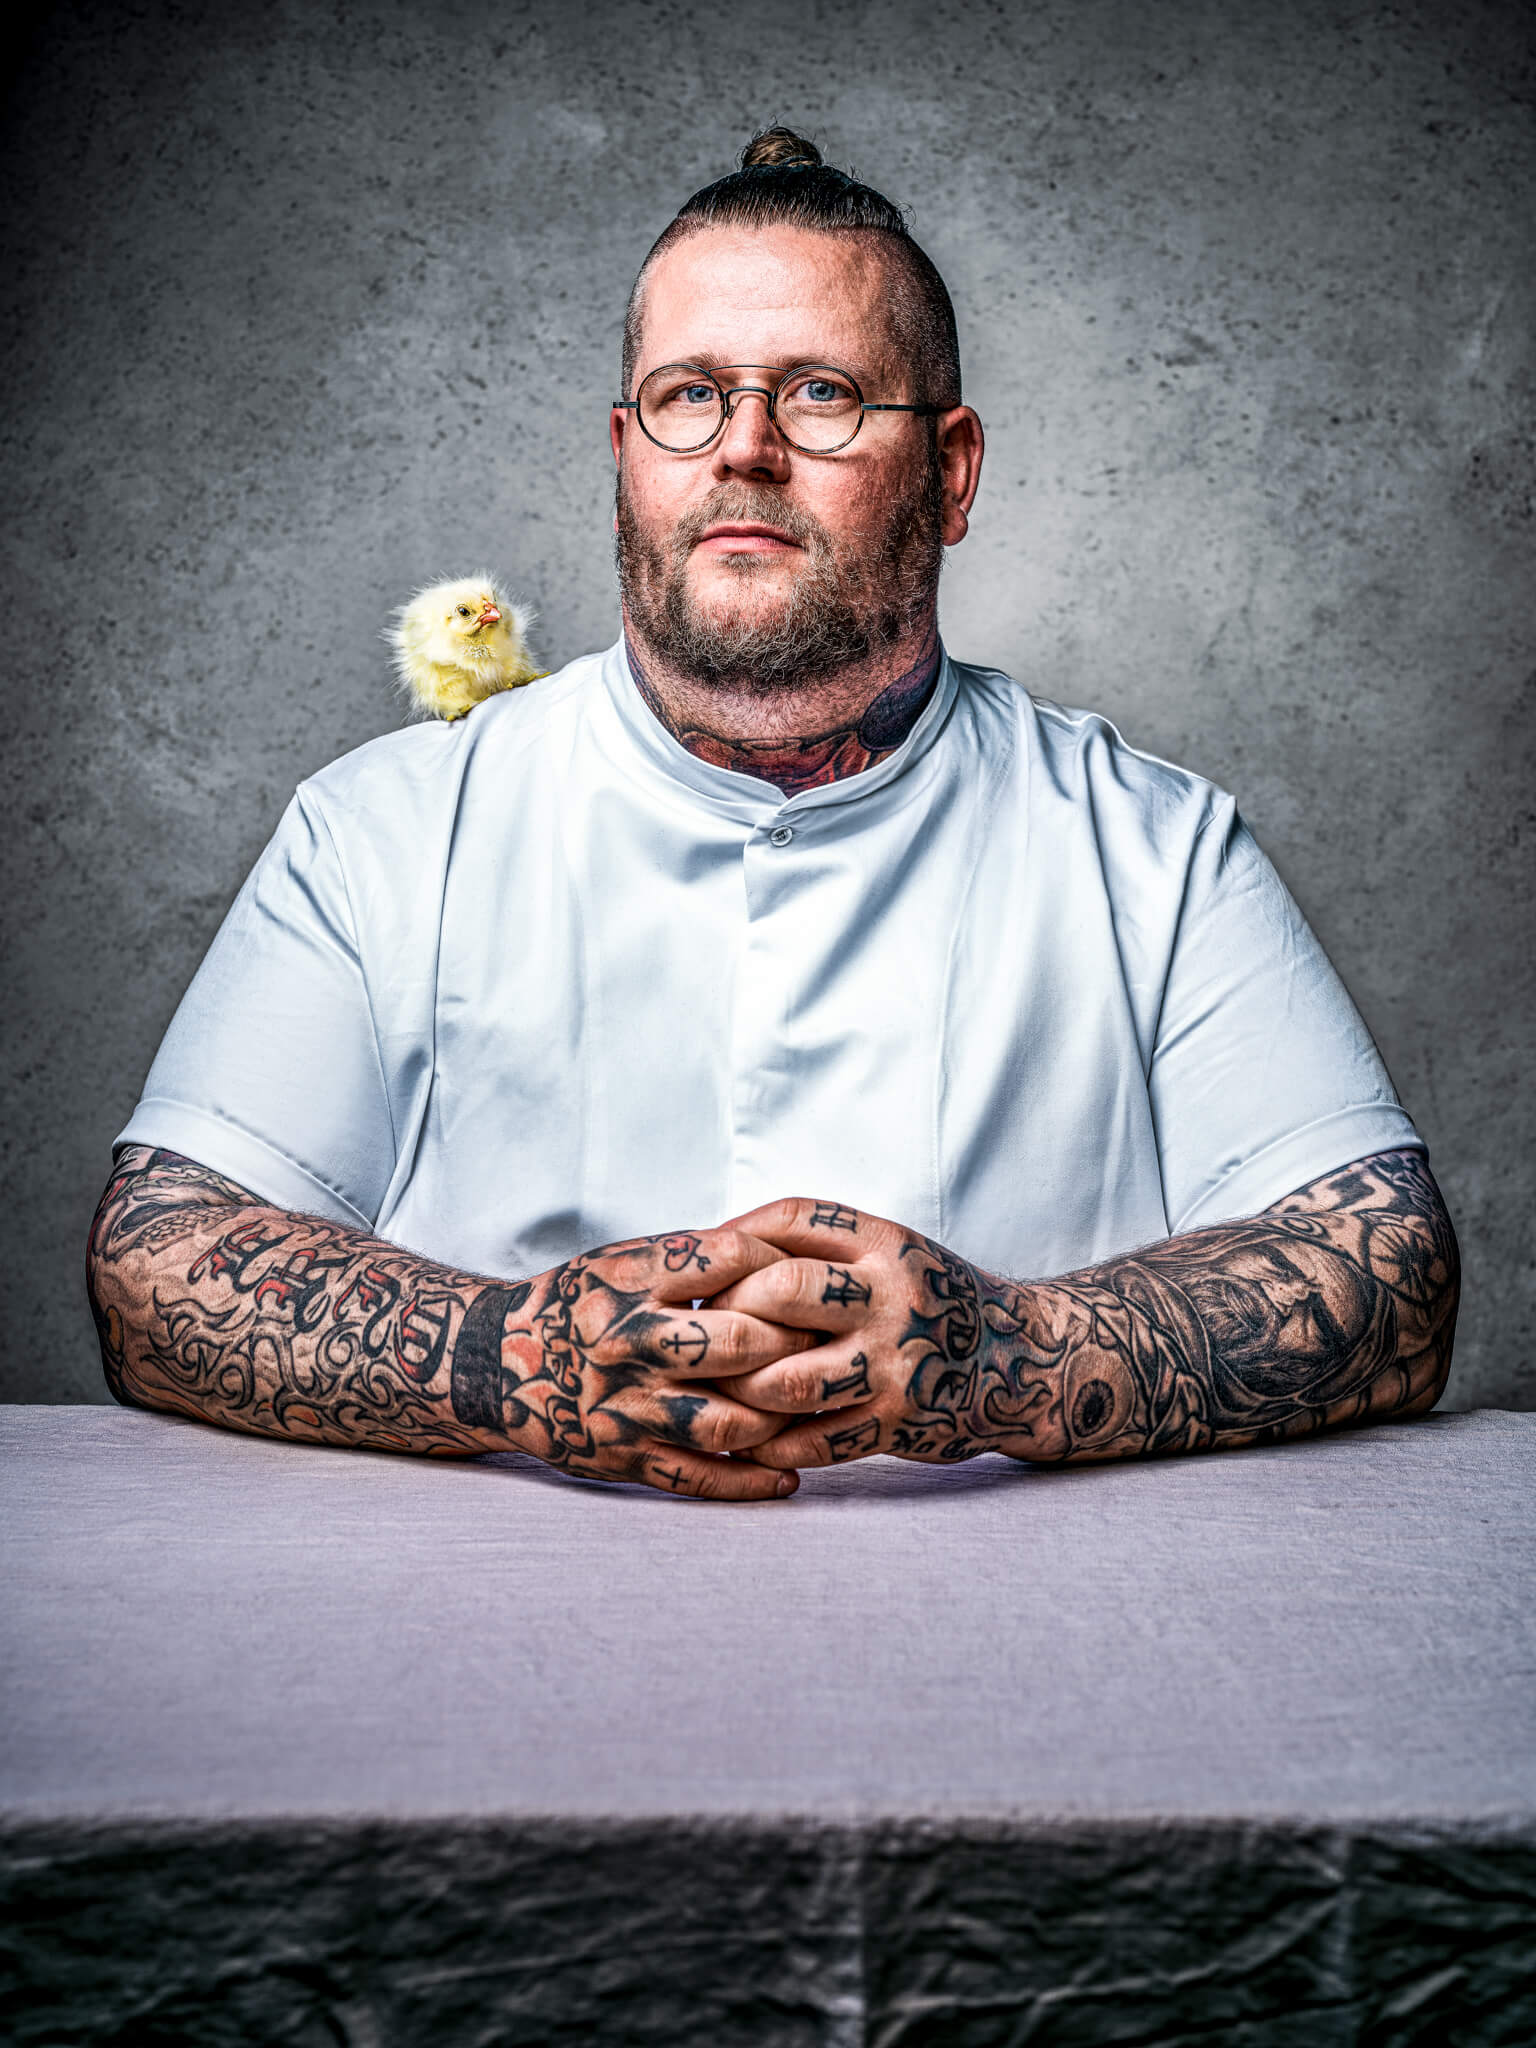 Eric Vilgaard, an extraordinary story on the way to becoming a star chef 